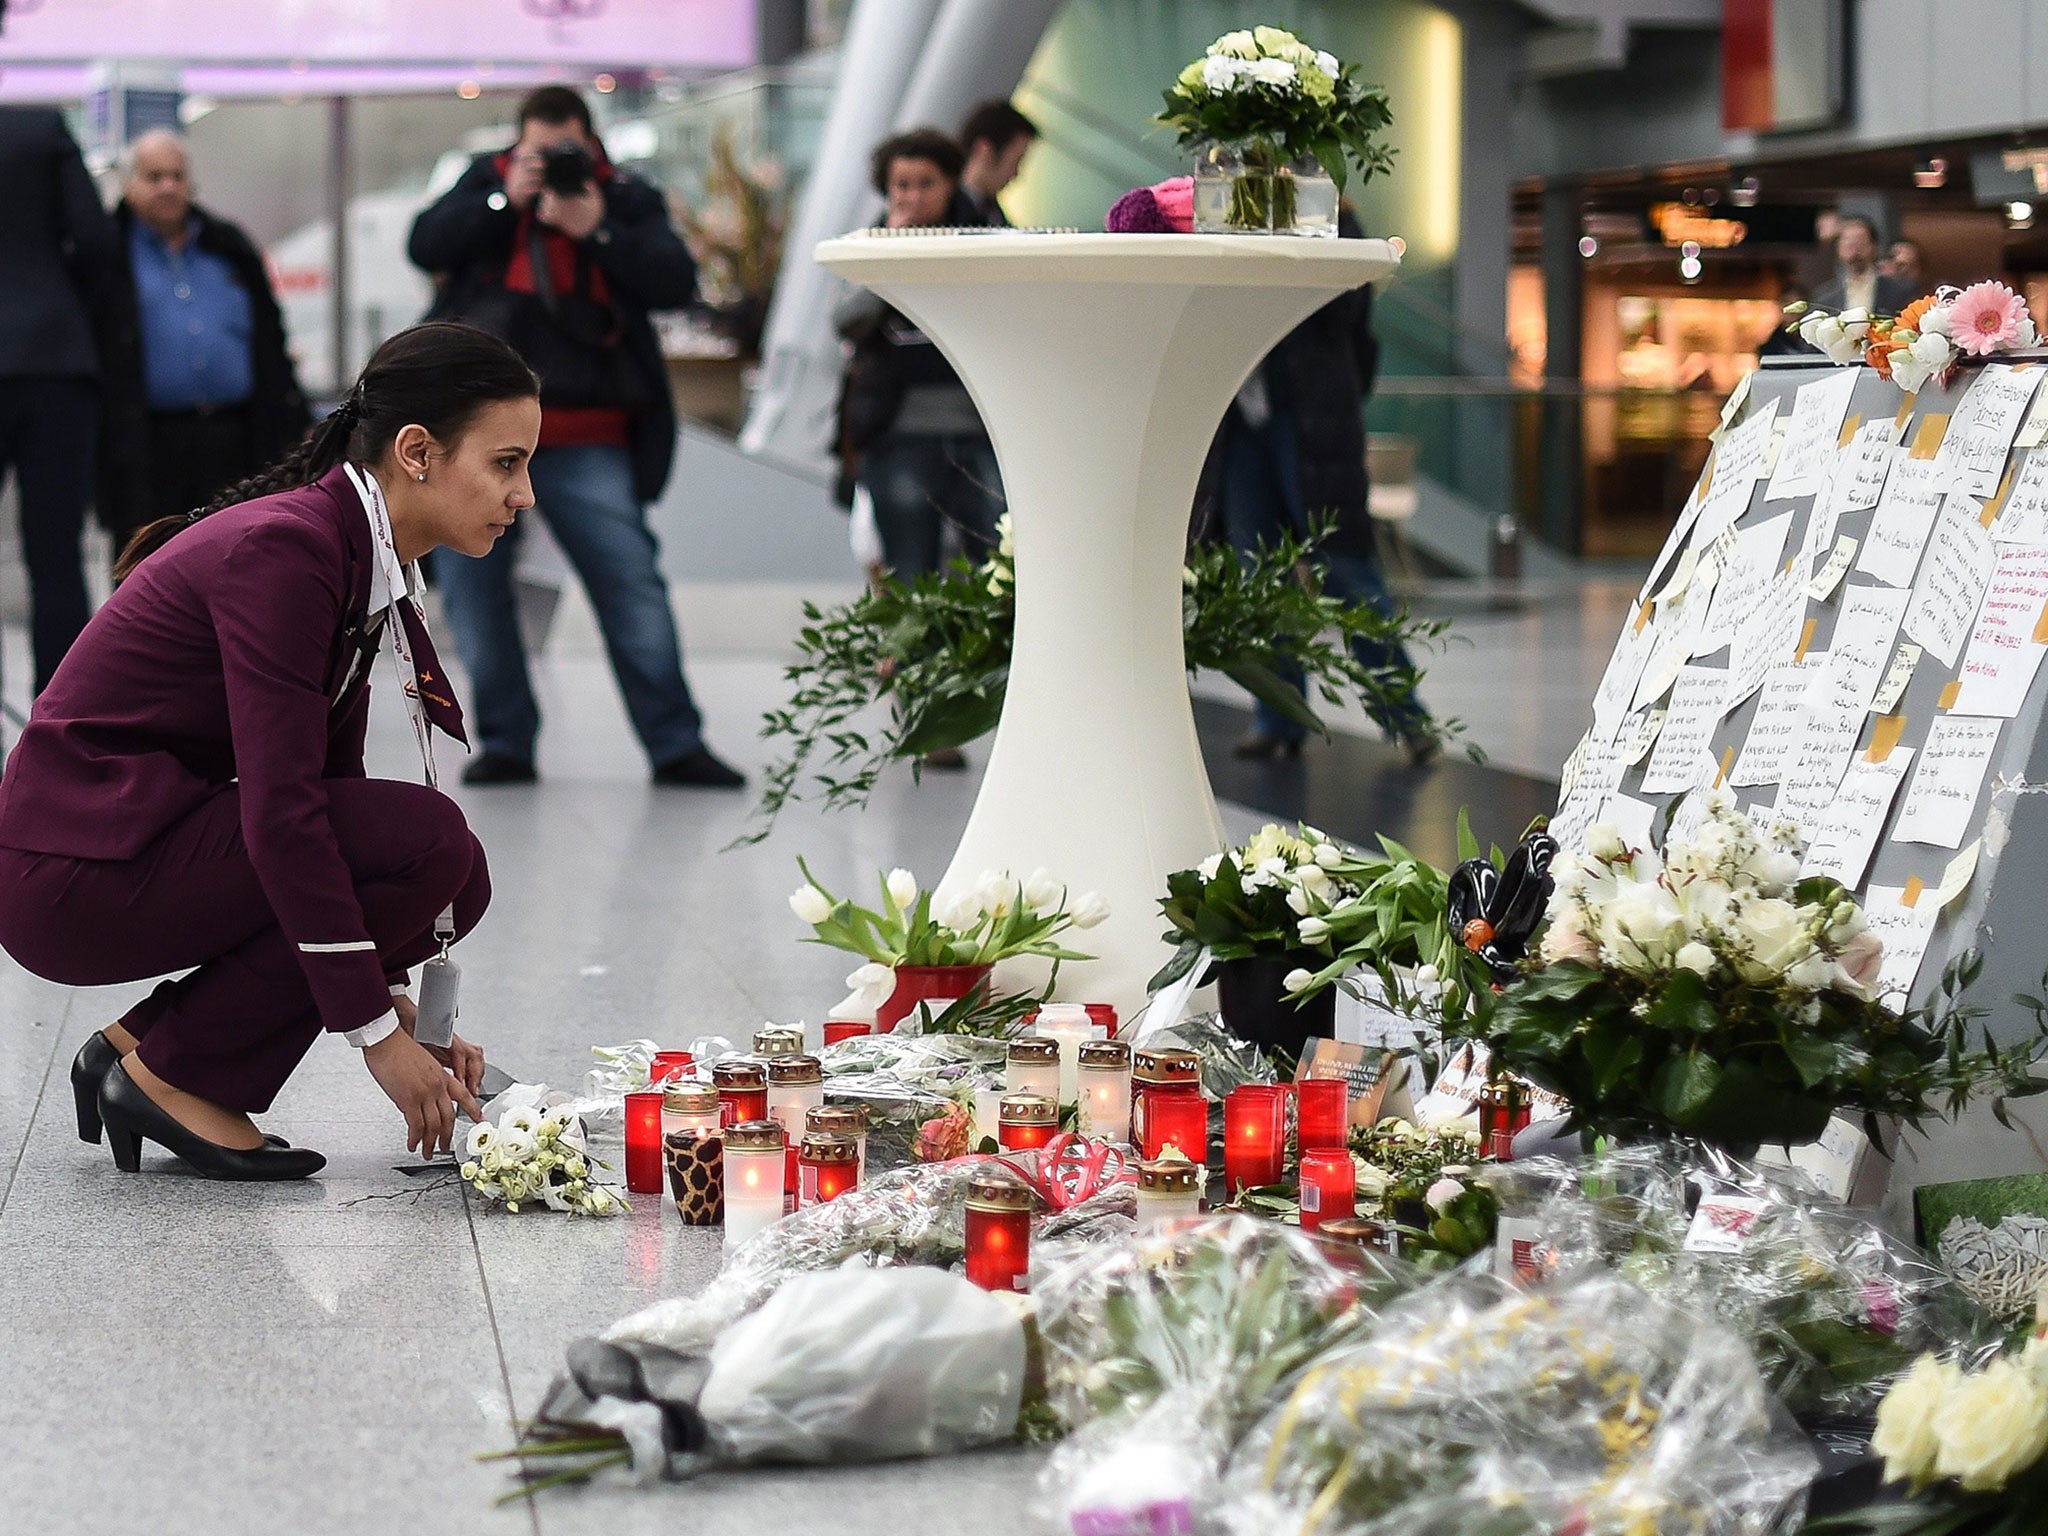 A Germanwings employee places flowers in commemoration of the victims of the Germanwings plane crash in the French Alps, at the airport in Duesseldorf, Germany